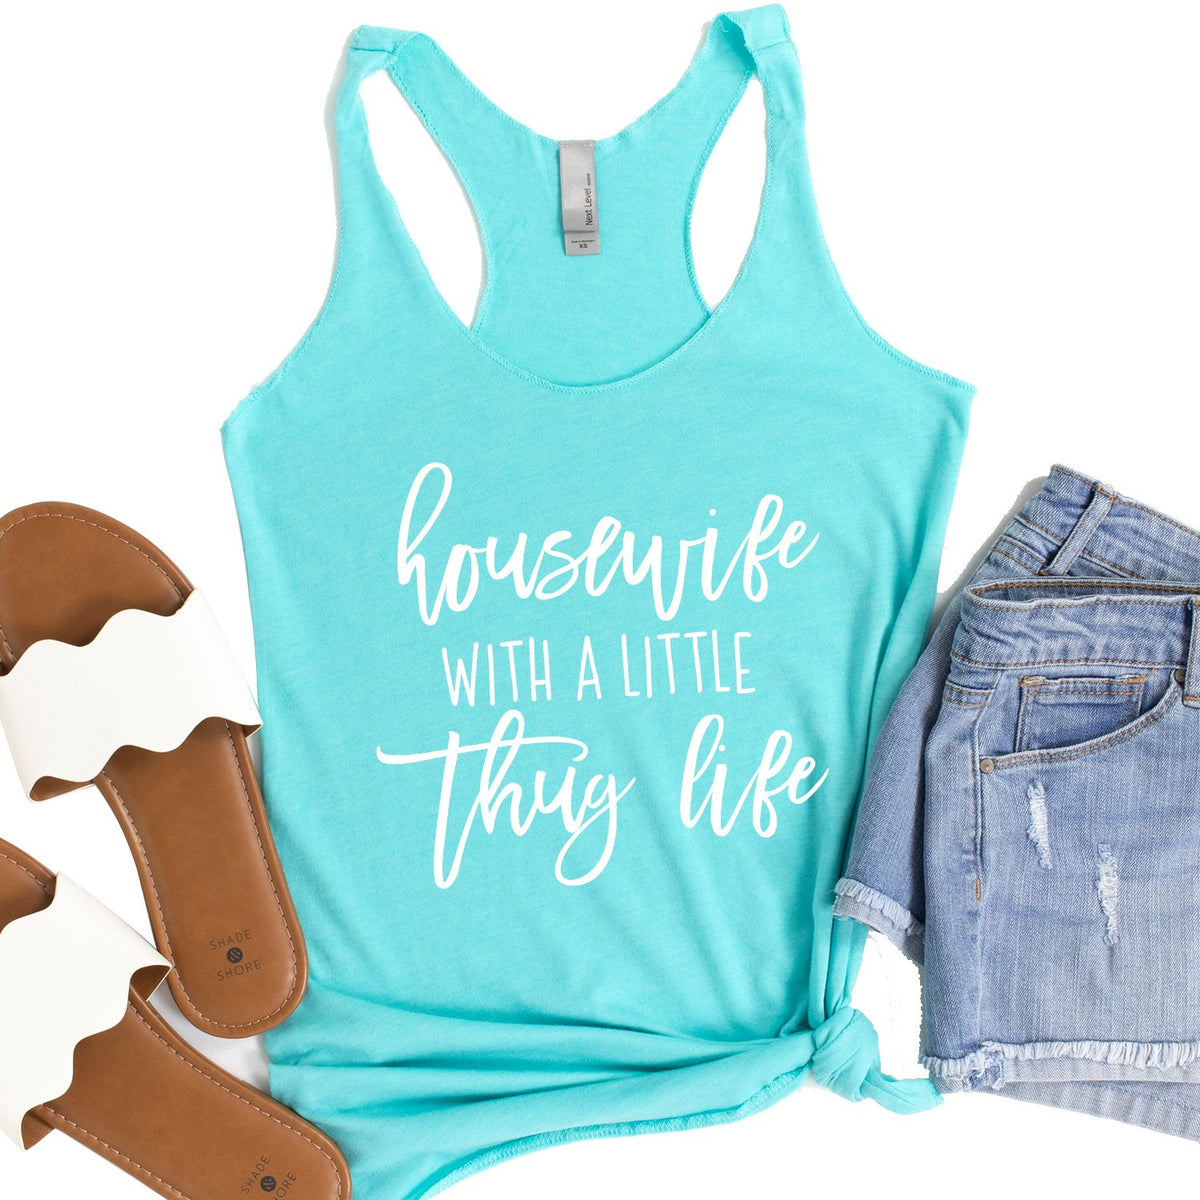 Housewife With A Little Thug Life - Tank Top Racerback